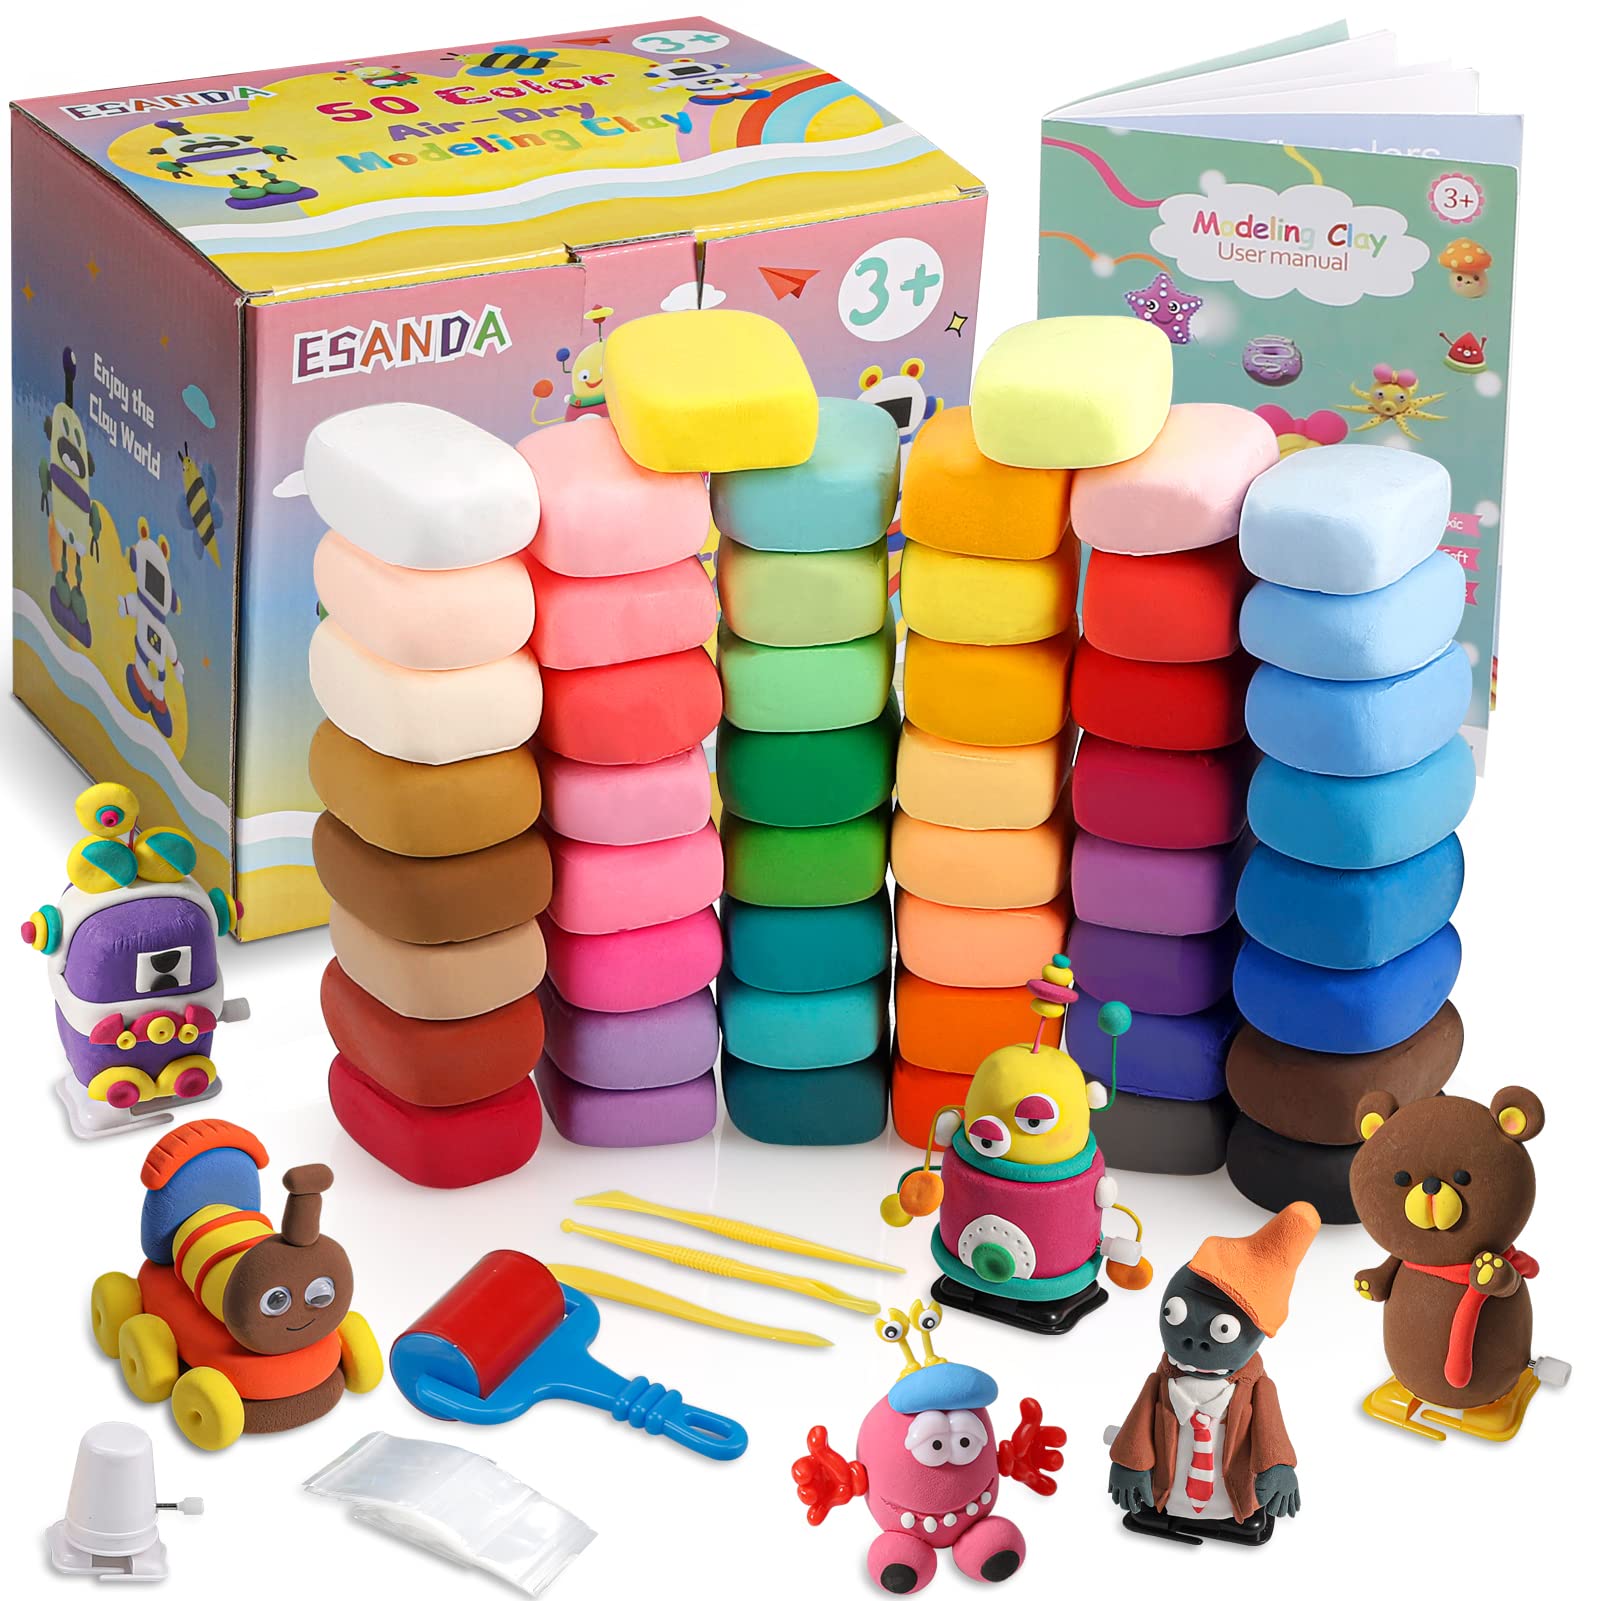 Modeling Clay Kit - 50 Colors Soft & Ultra Light Air Dry Magic Clay with  Sculpting Tools Safe & Non-Toxic Great Gift for Kids.